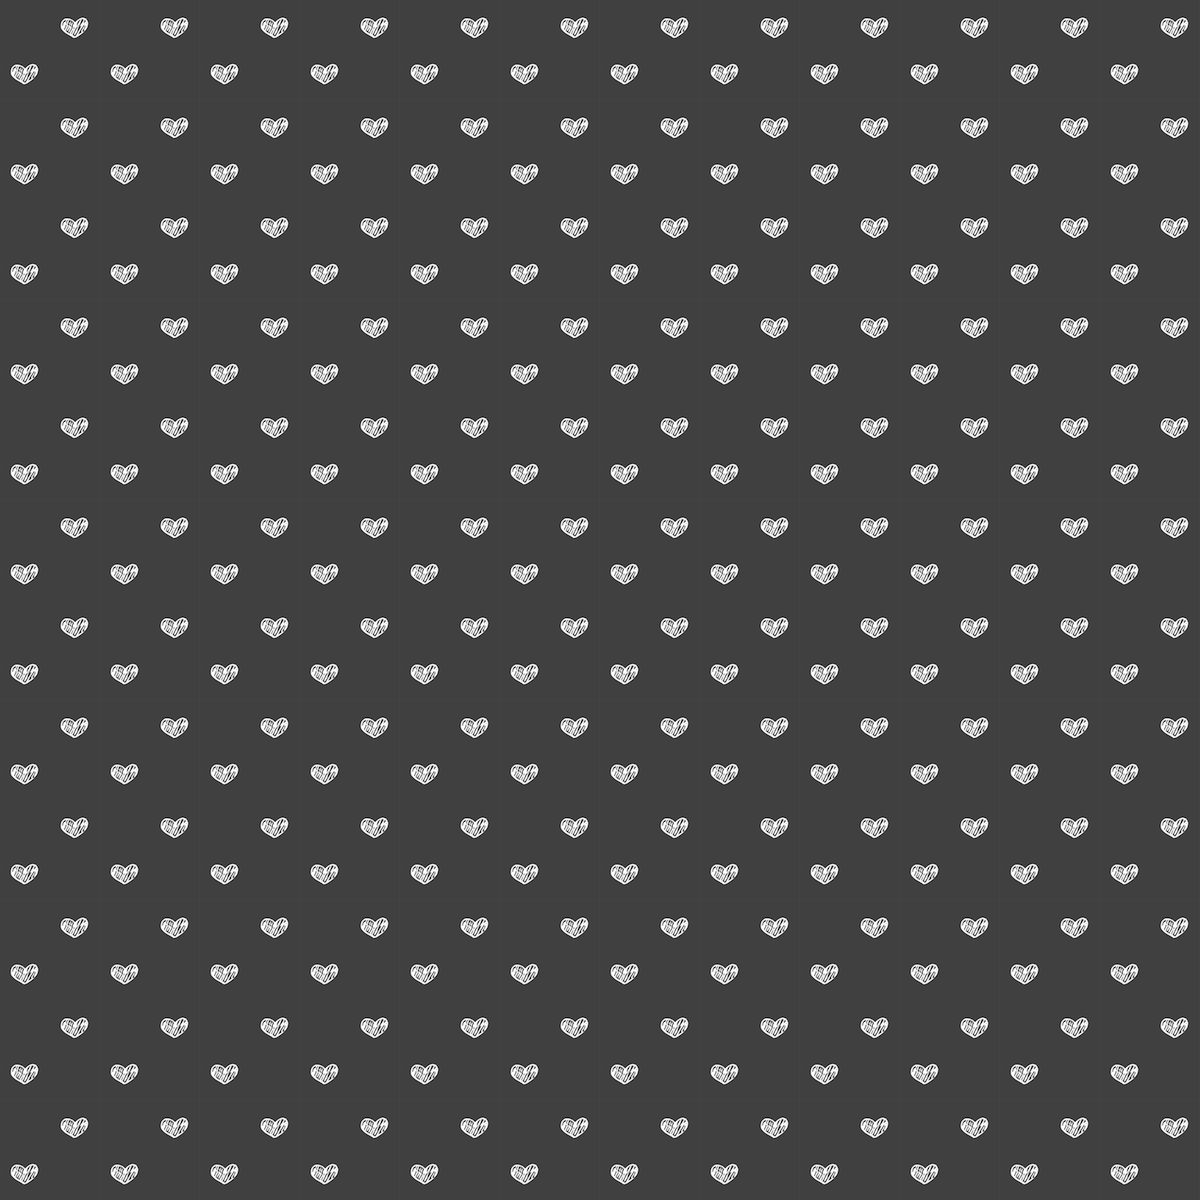 8-best-images-of-free-printable-black-and-white-pattern-paper-free